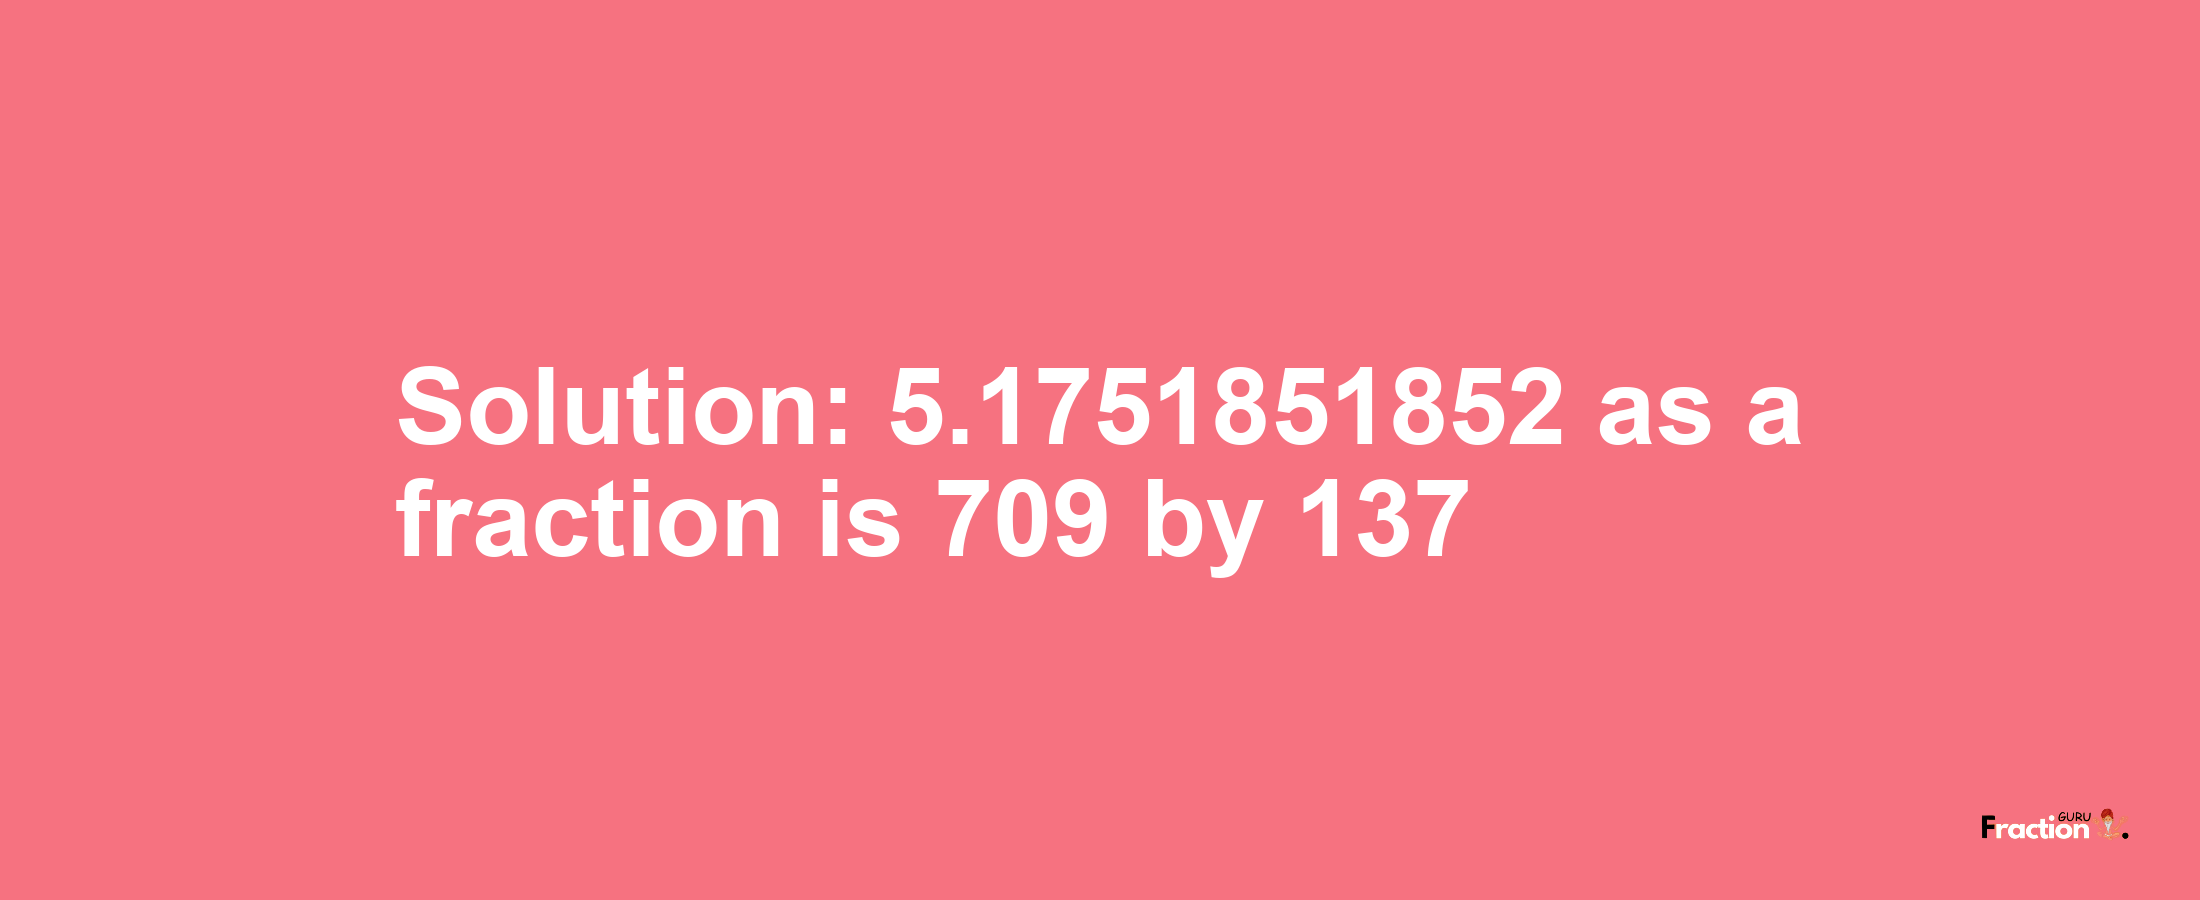 Solution:5.1751851852 as a fraction is 709/137